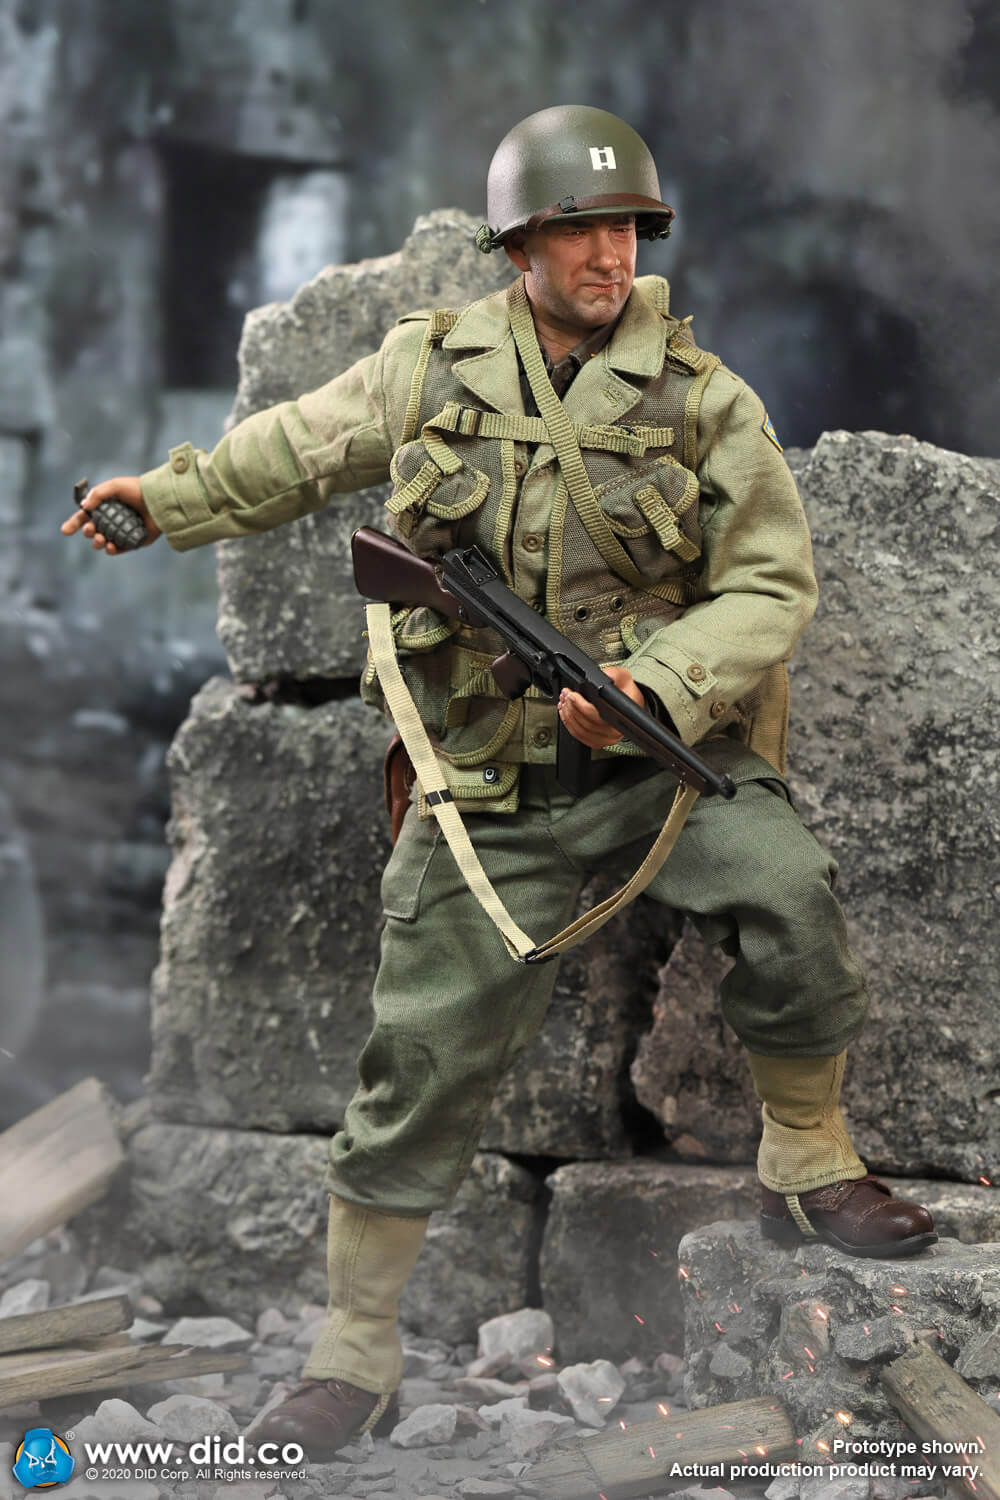 NEW PRODUCT: DiD: A80145 1/6 scale WWII US 2nd Ranger Battalion Series 3 Captain Miller 16199